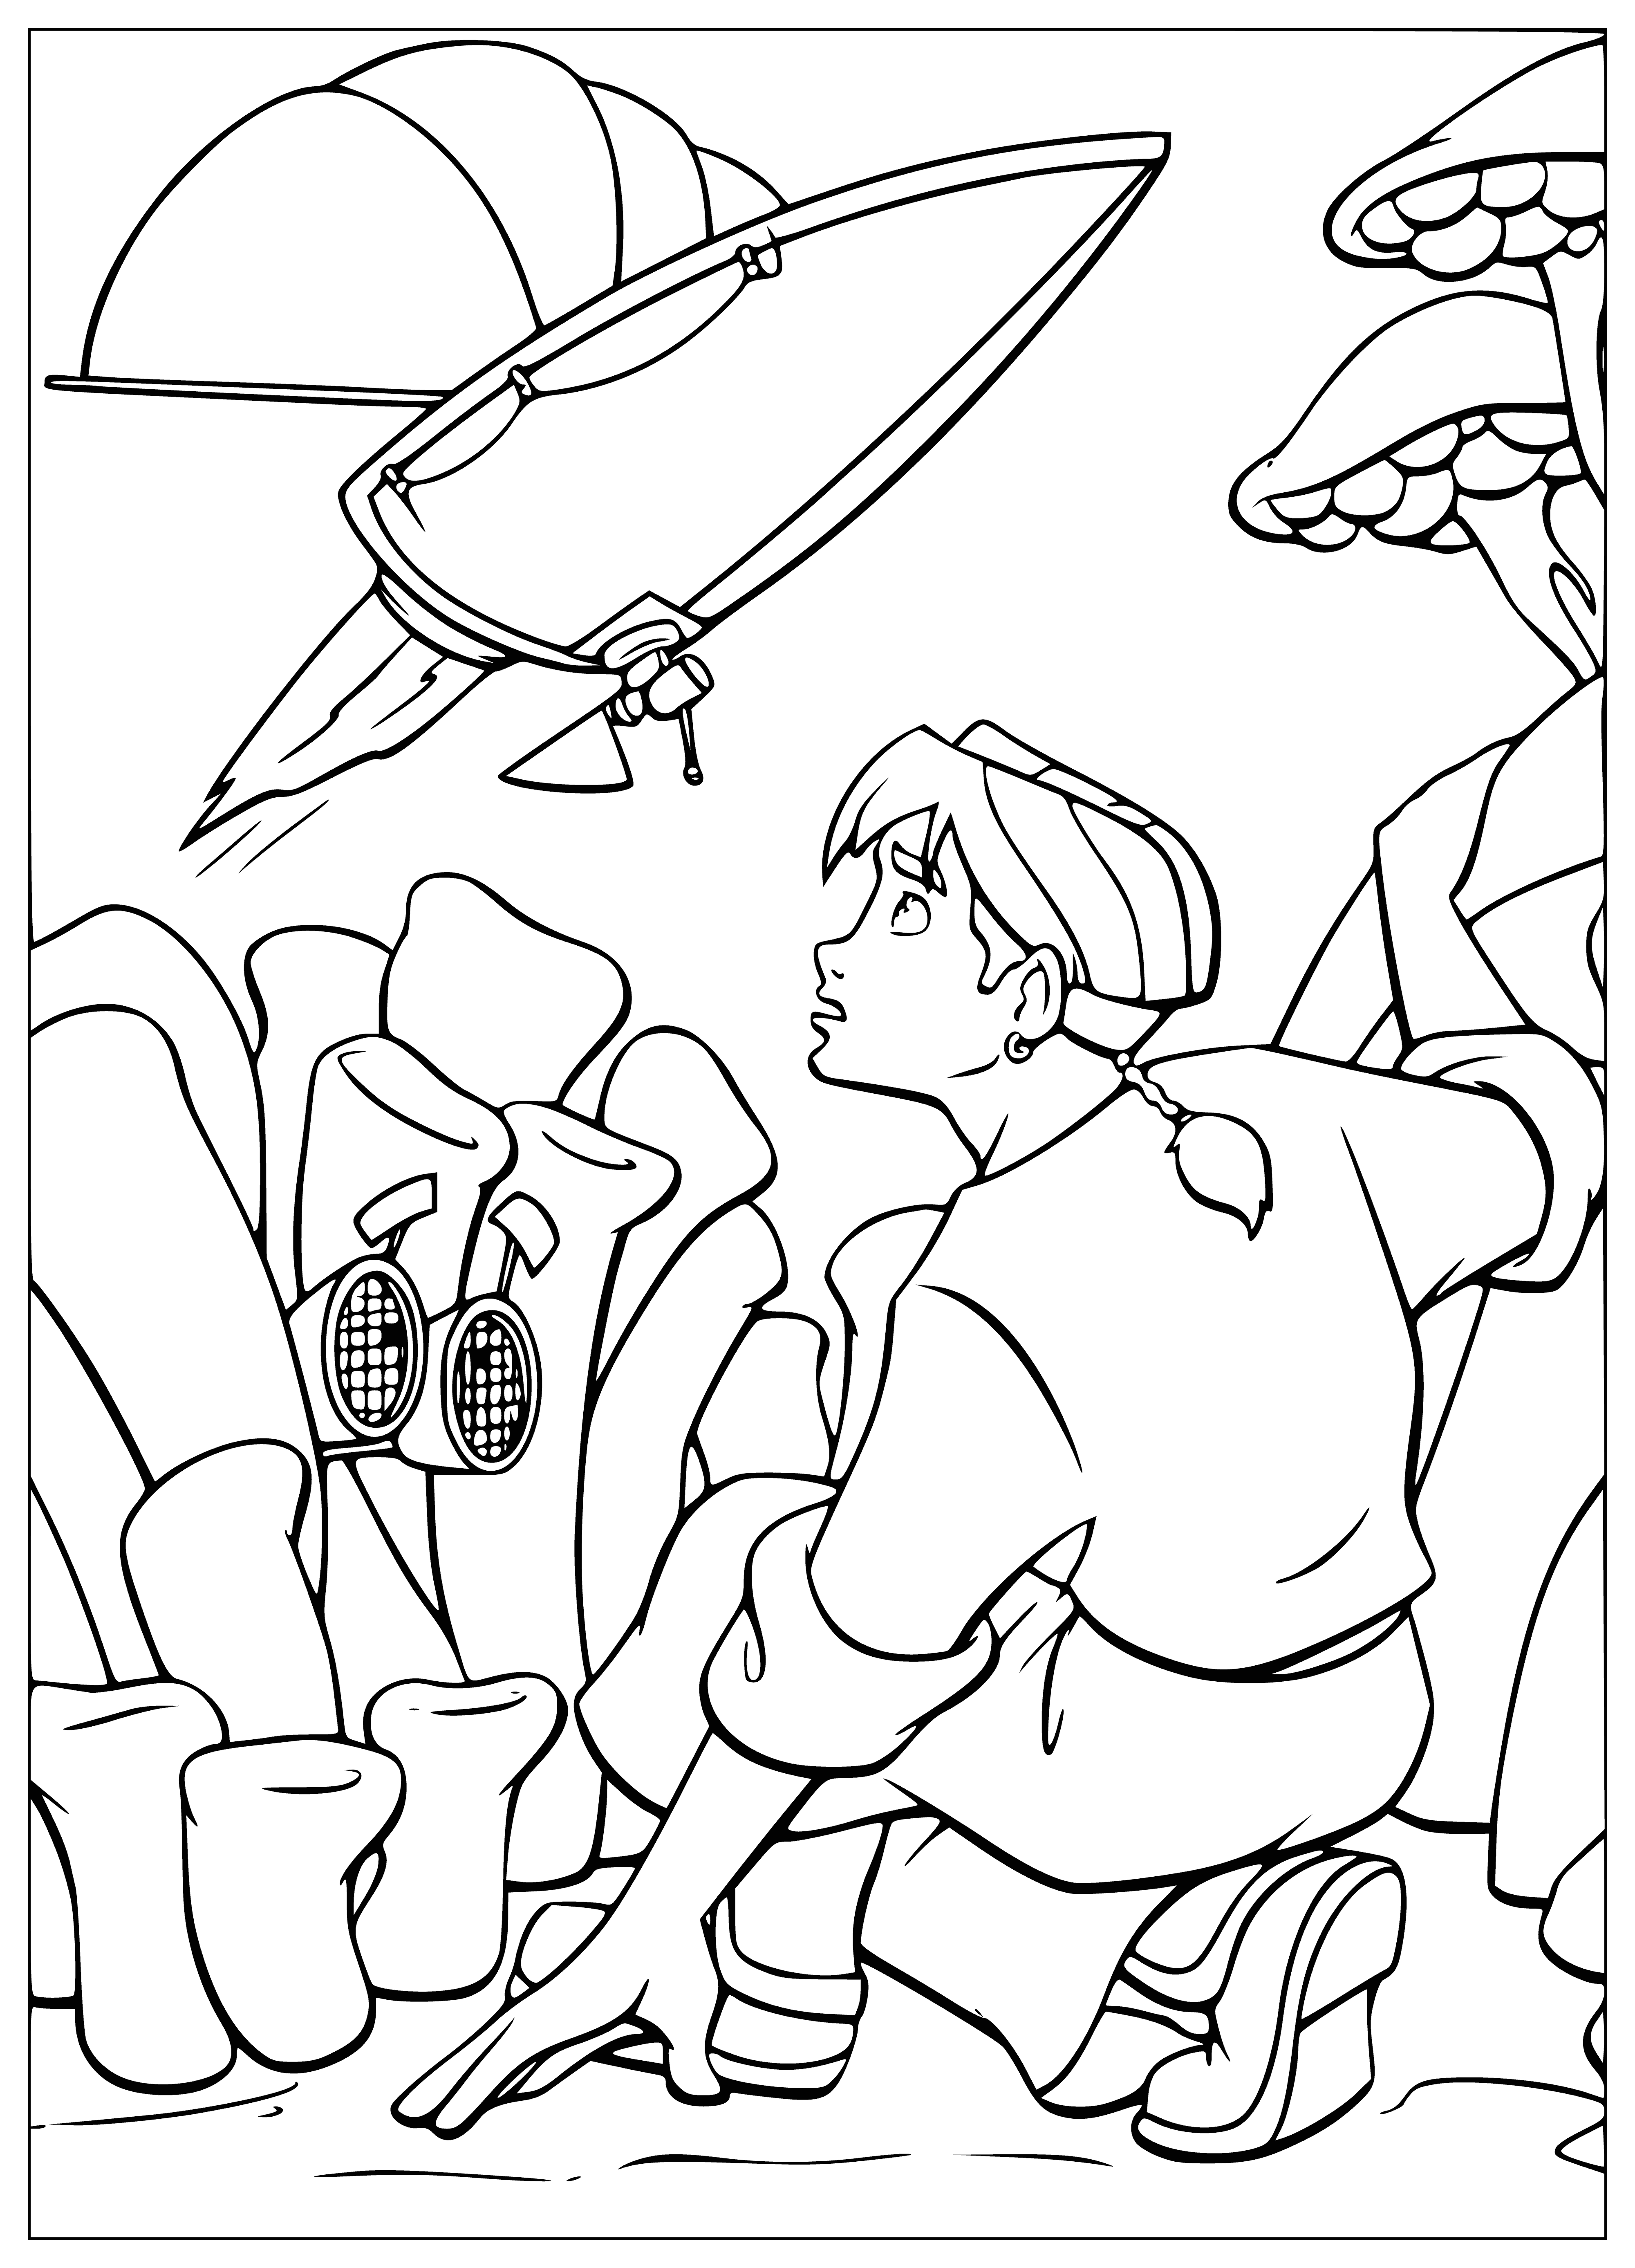 coloring page: Jim is looking at a robot with a rectangular green body, round blue eyes, two claw-like arms and two rectangular legs. #Robot #ColoringPage